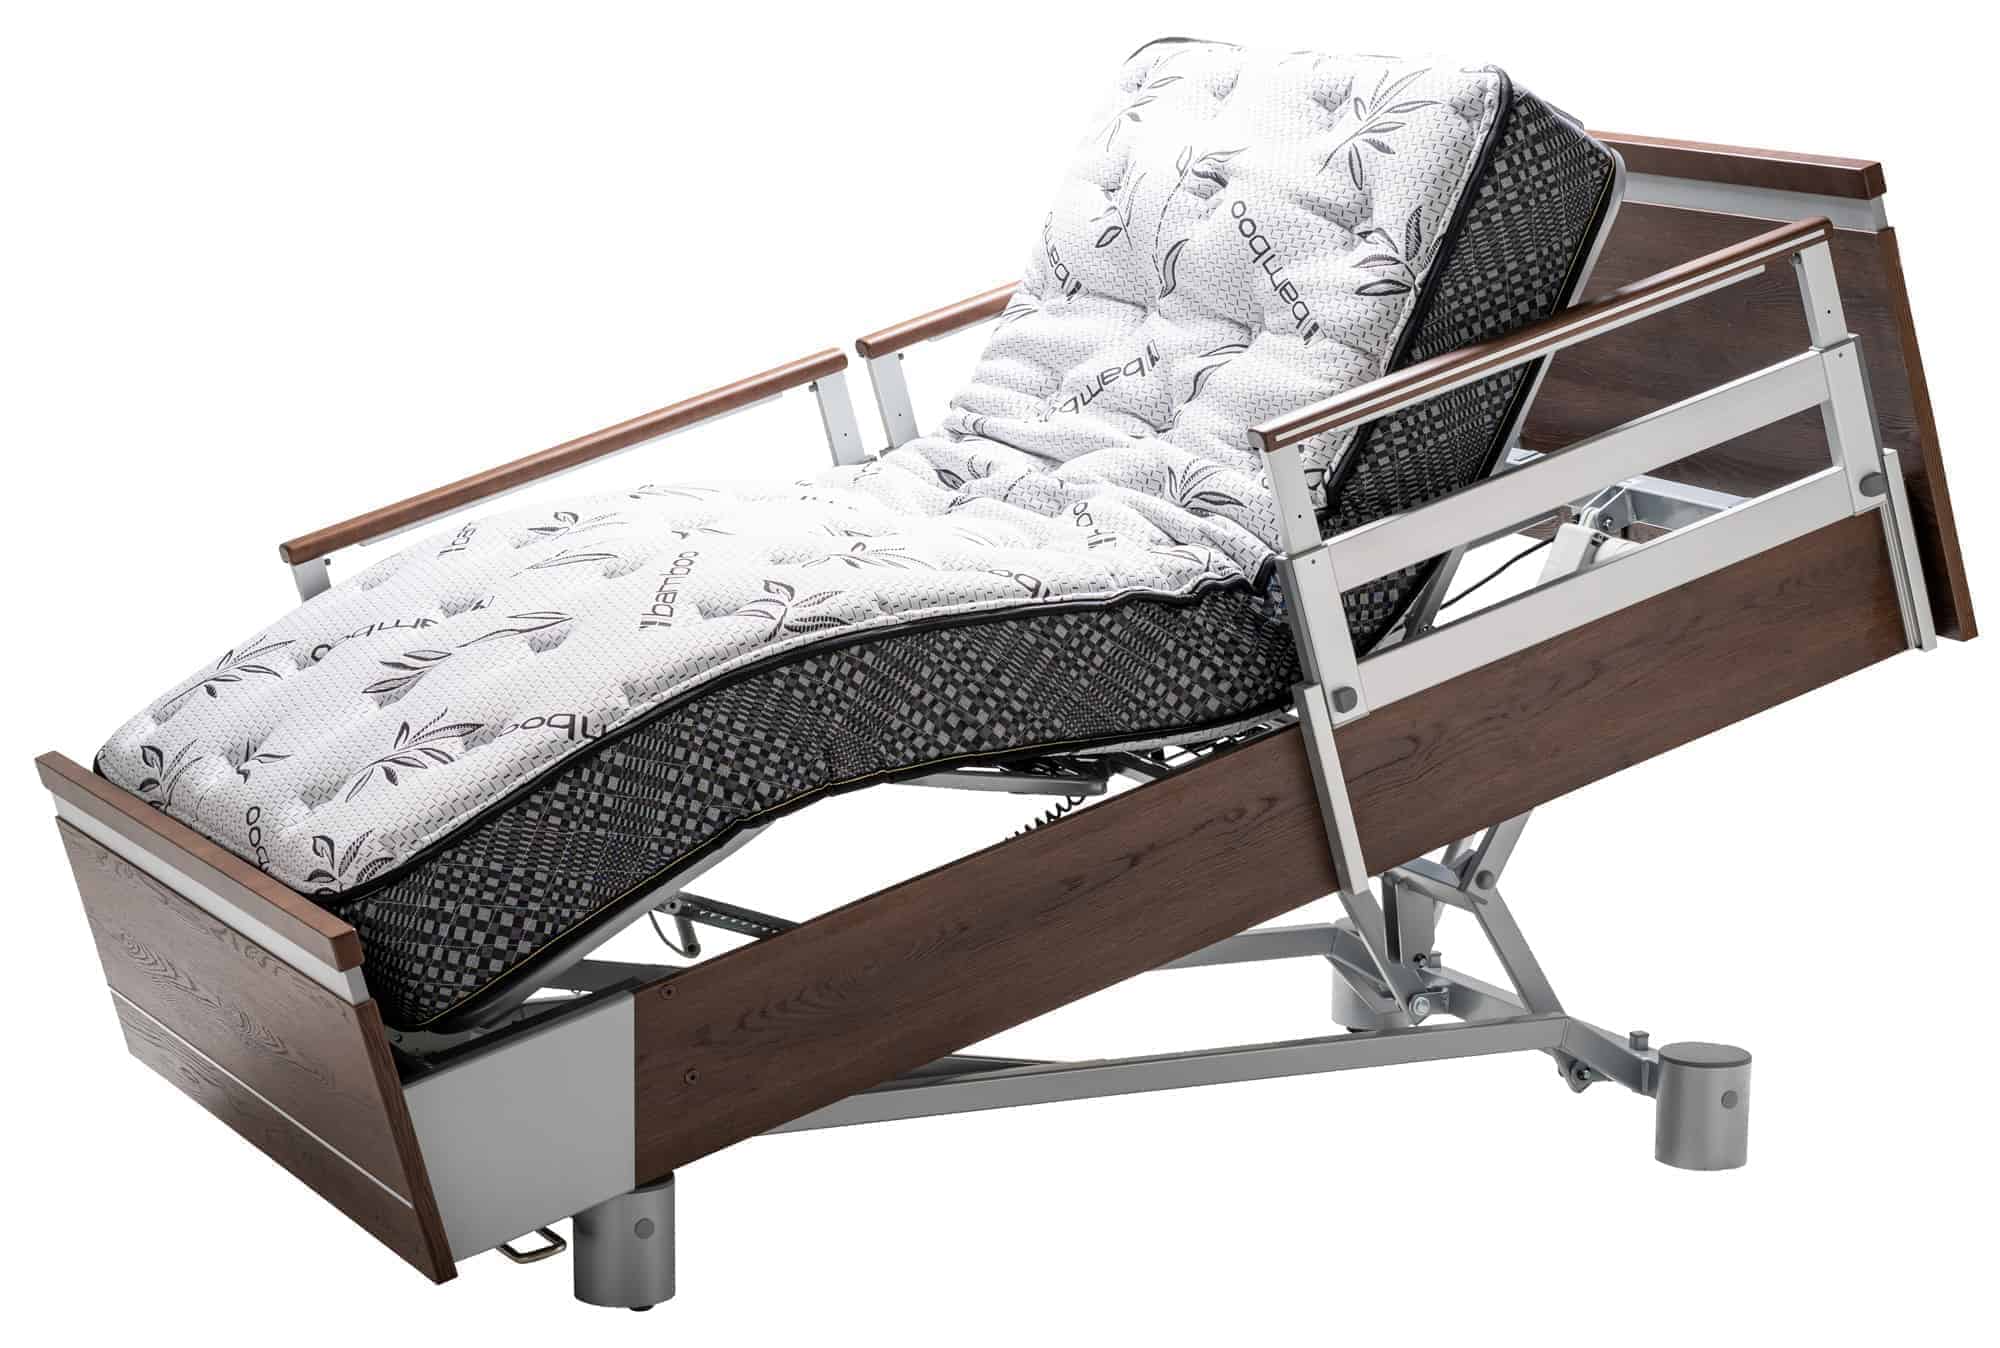 Semi-Electric Bed (Single Crank) - Homecare Beds - Beds - Products - Drive  Medical US Site